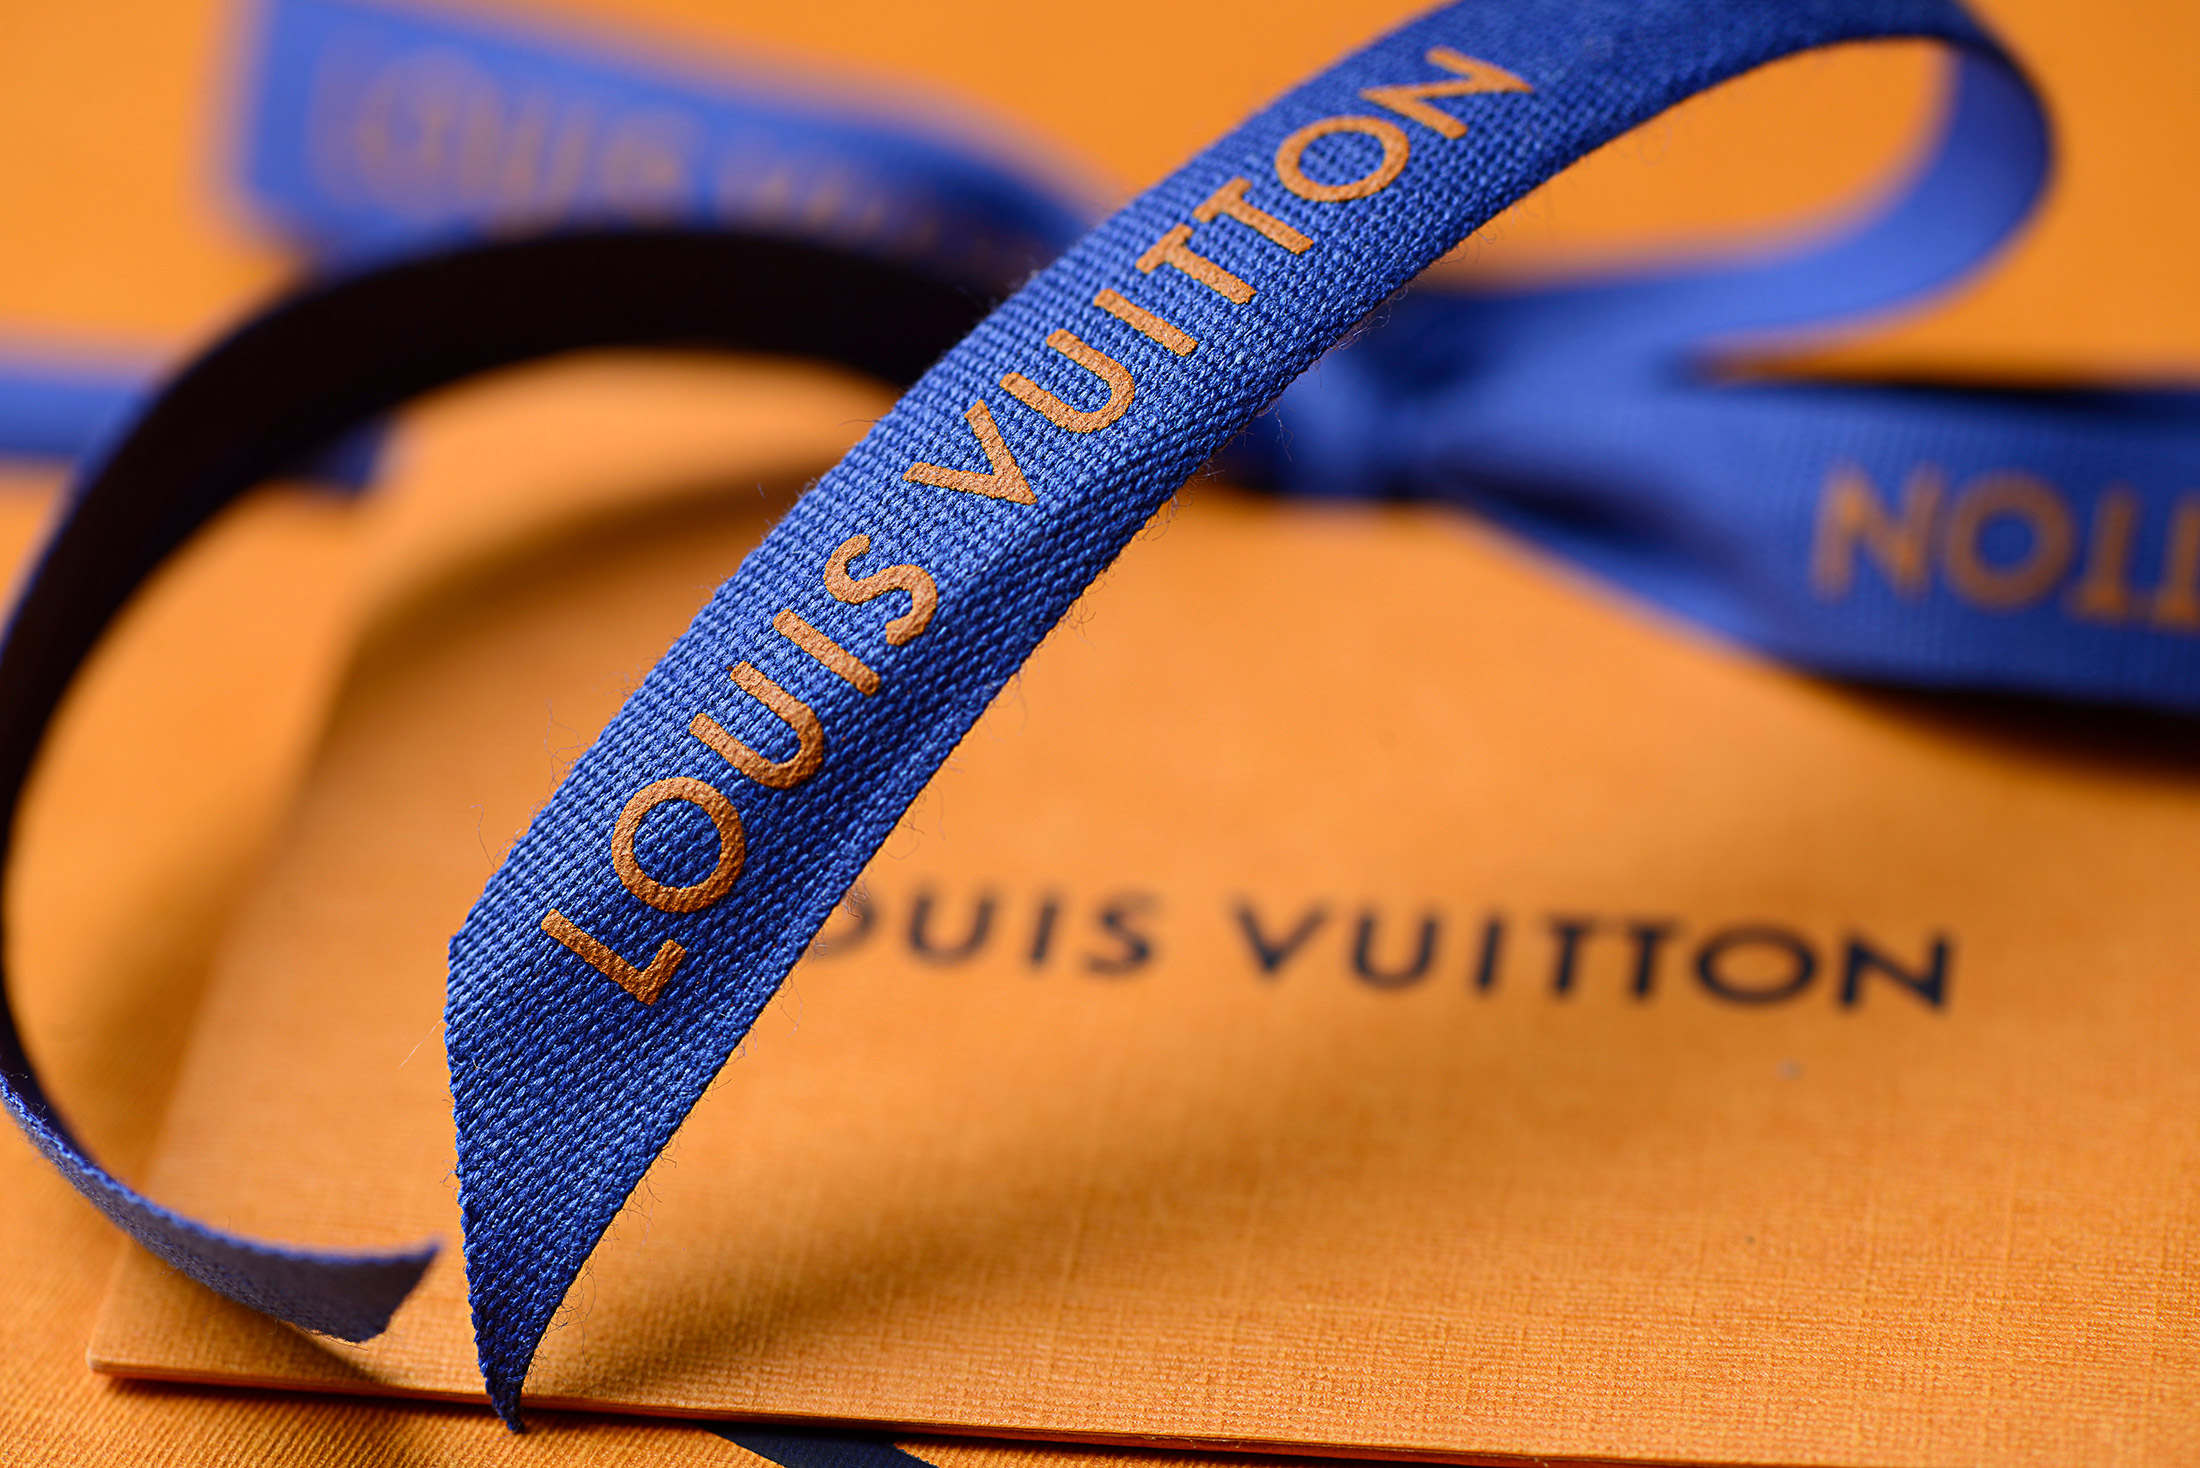 Louis Vuitton Founded In 1854